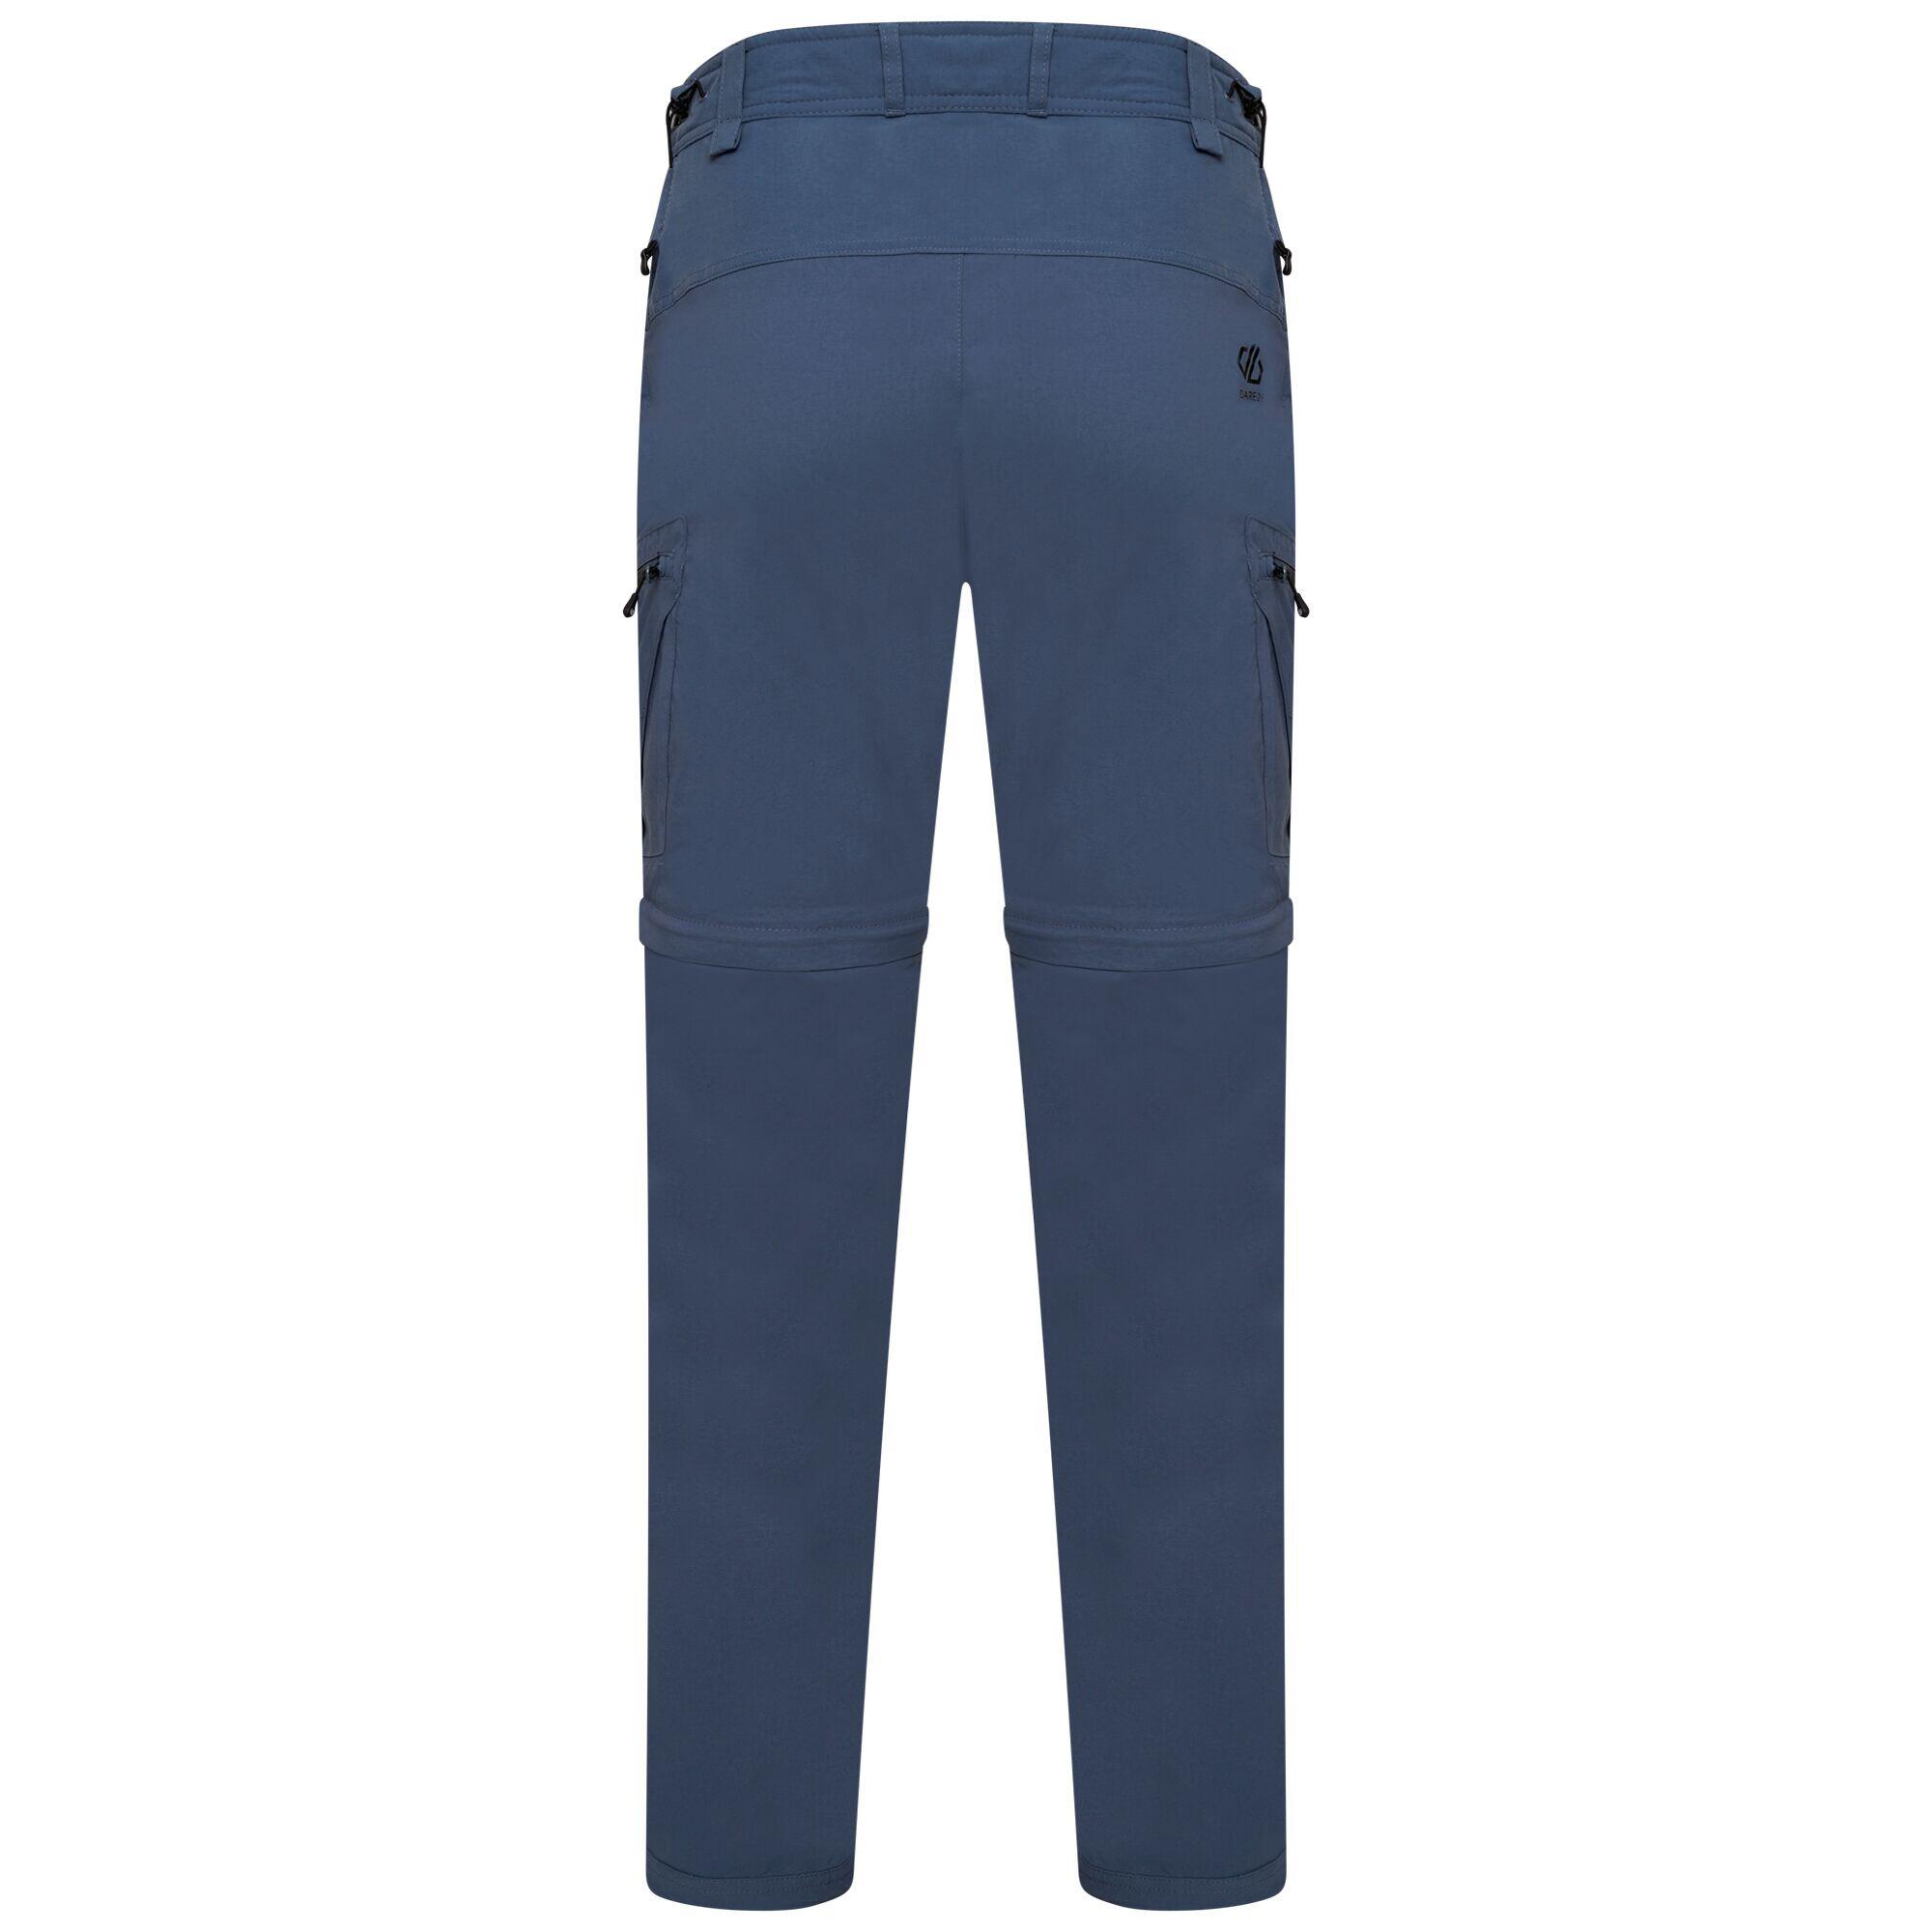 Versatile Men's Stretch Cargo Trousers: Poly-Spandex Track Pants with Curvy Zip  Pockets. Ideal for Jogging,